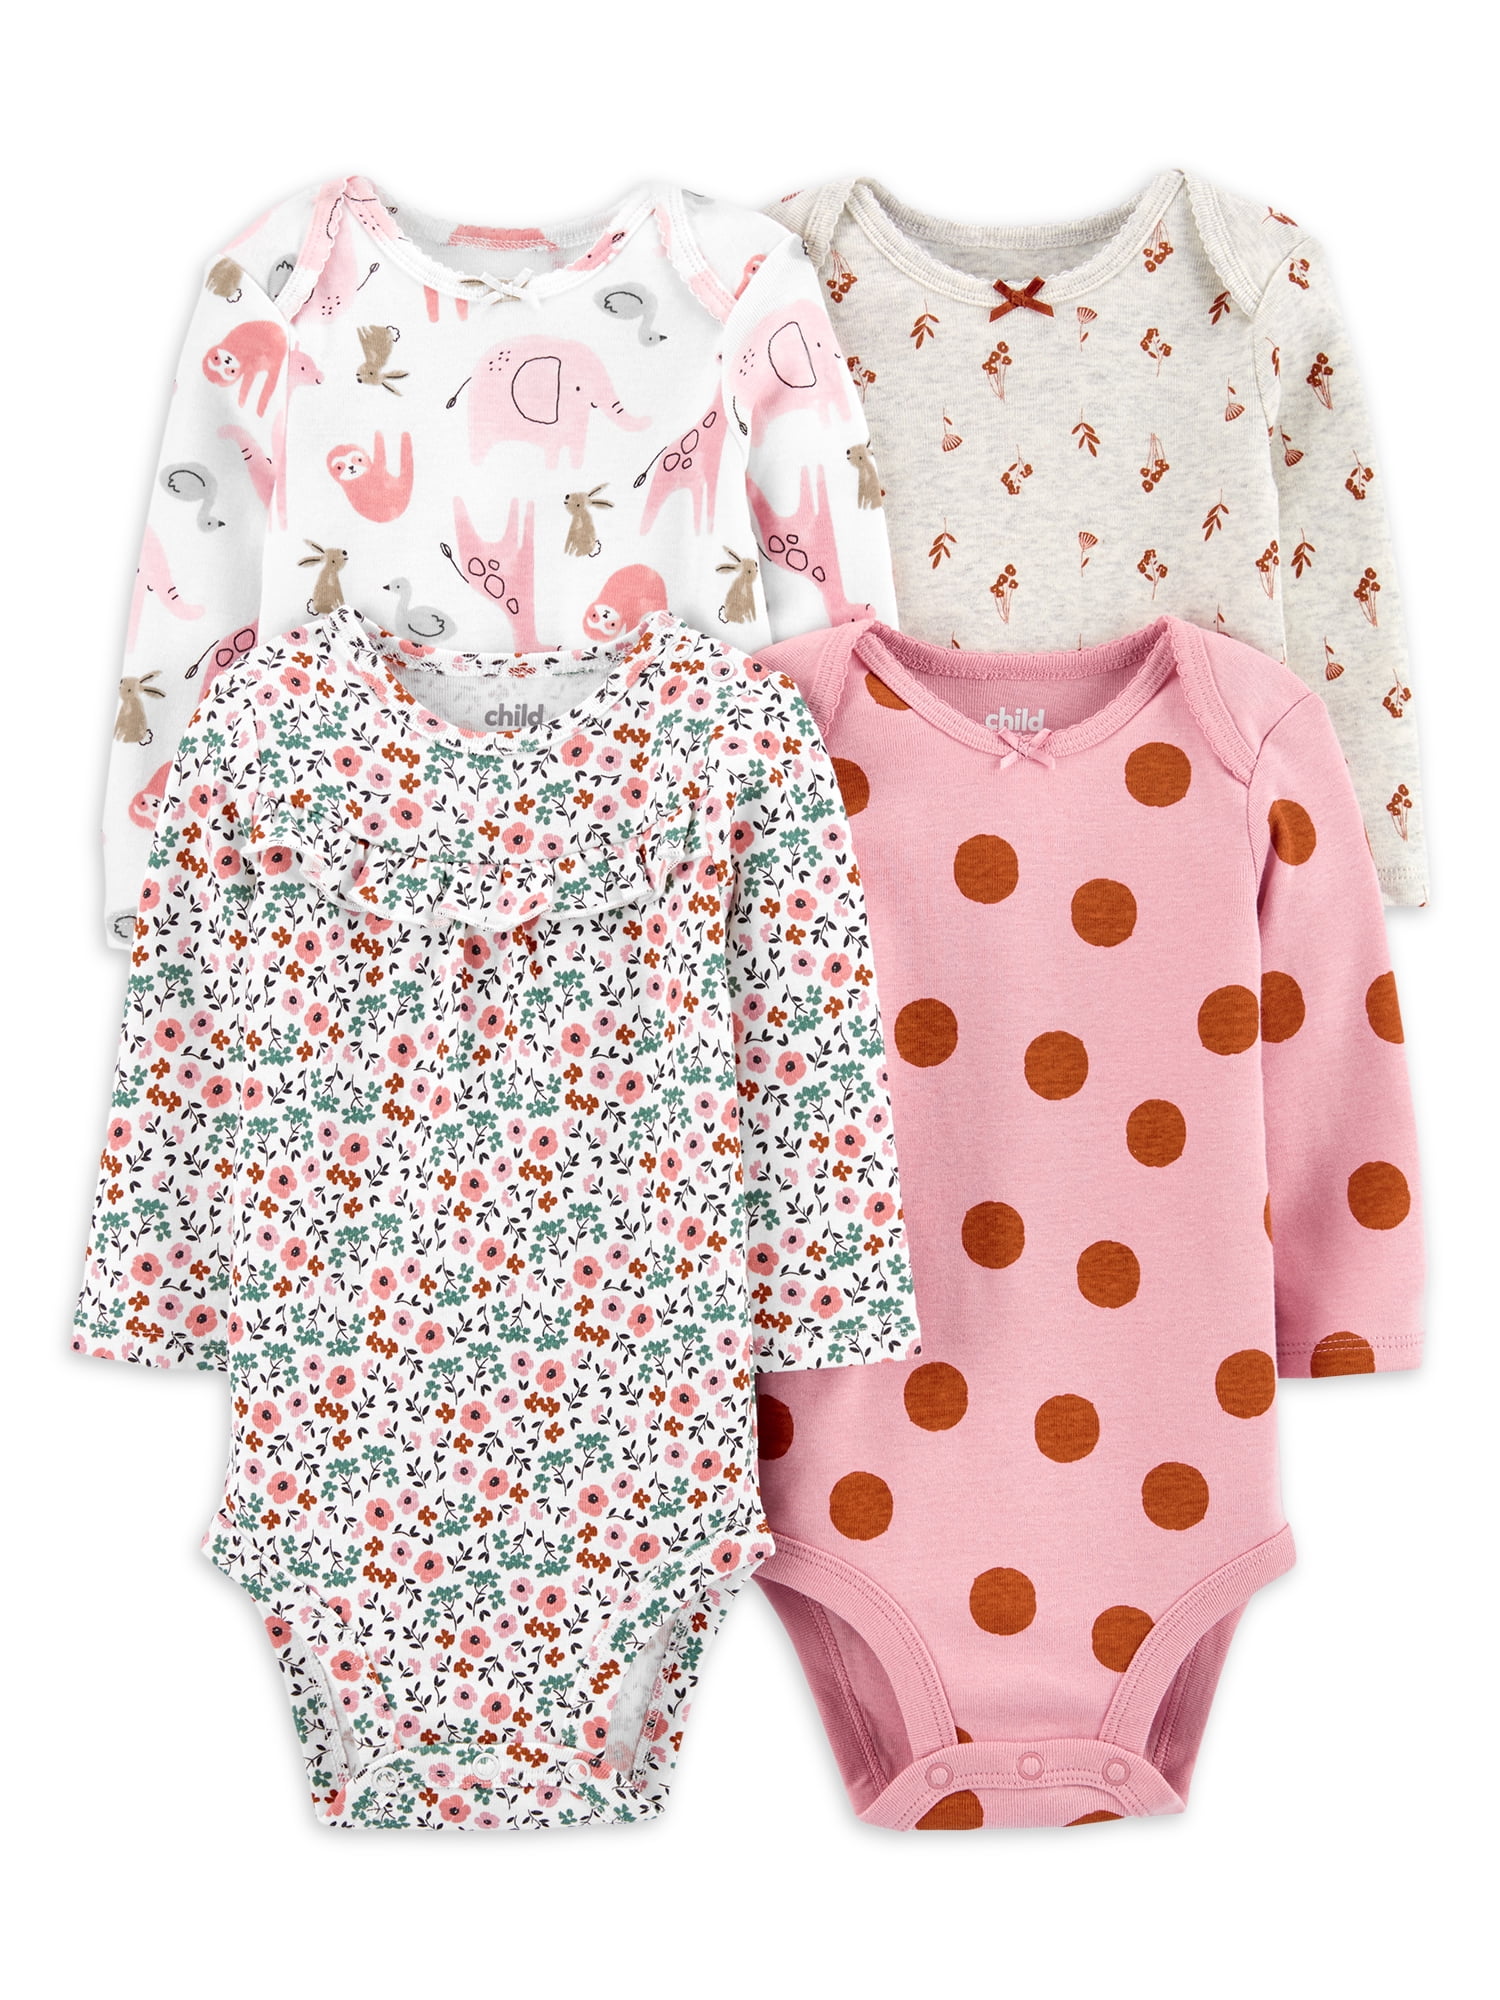 Carter's Baby Girls 4-Pack Printed Cotton Long Sleeve Bodysuits